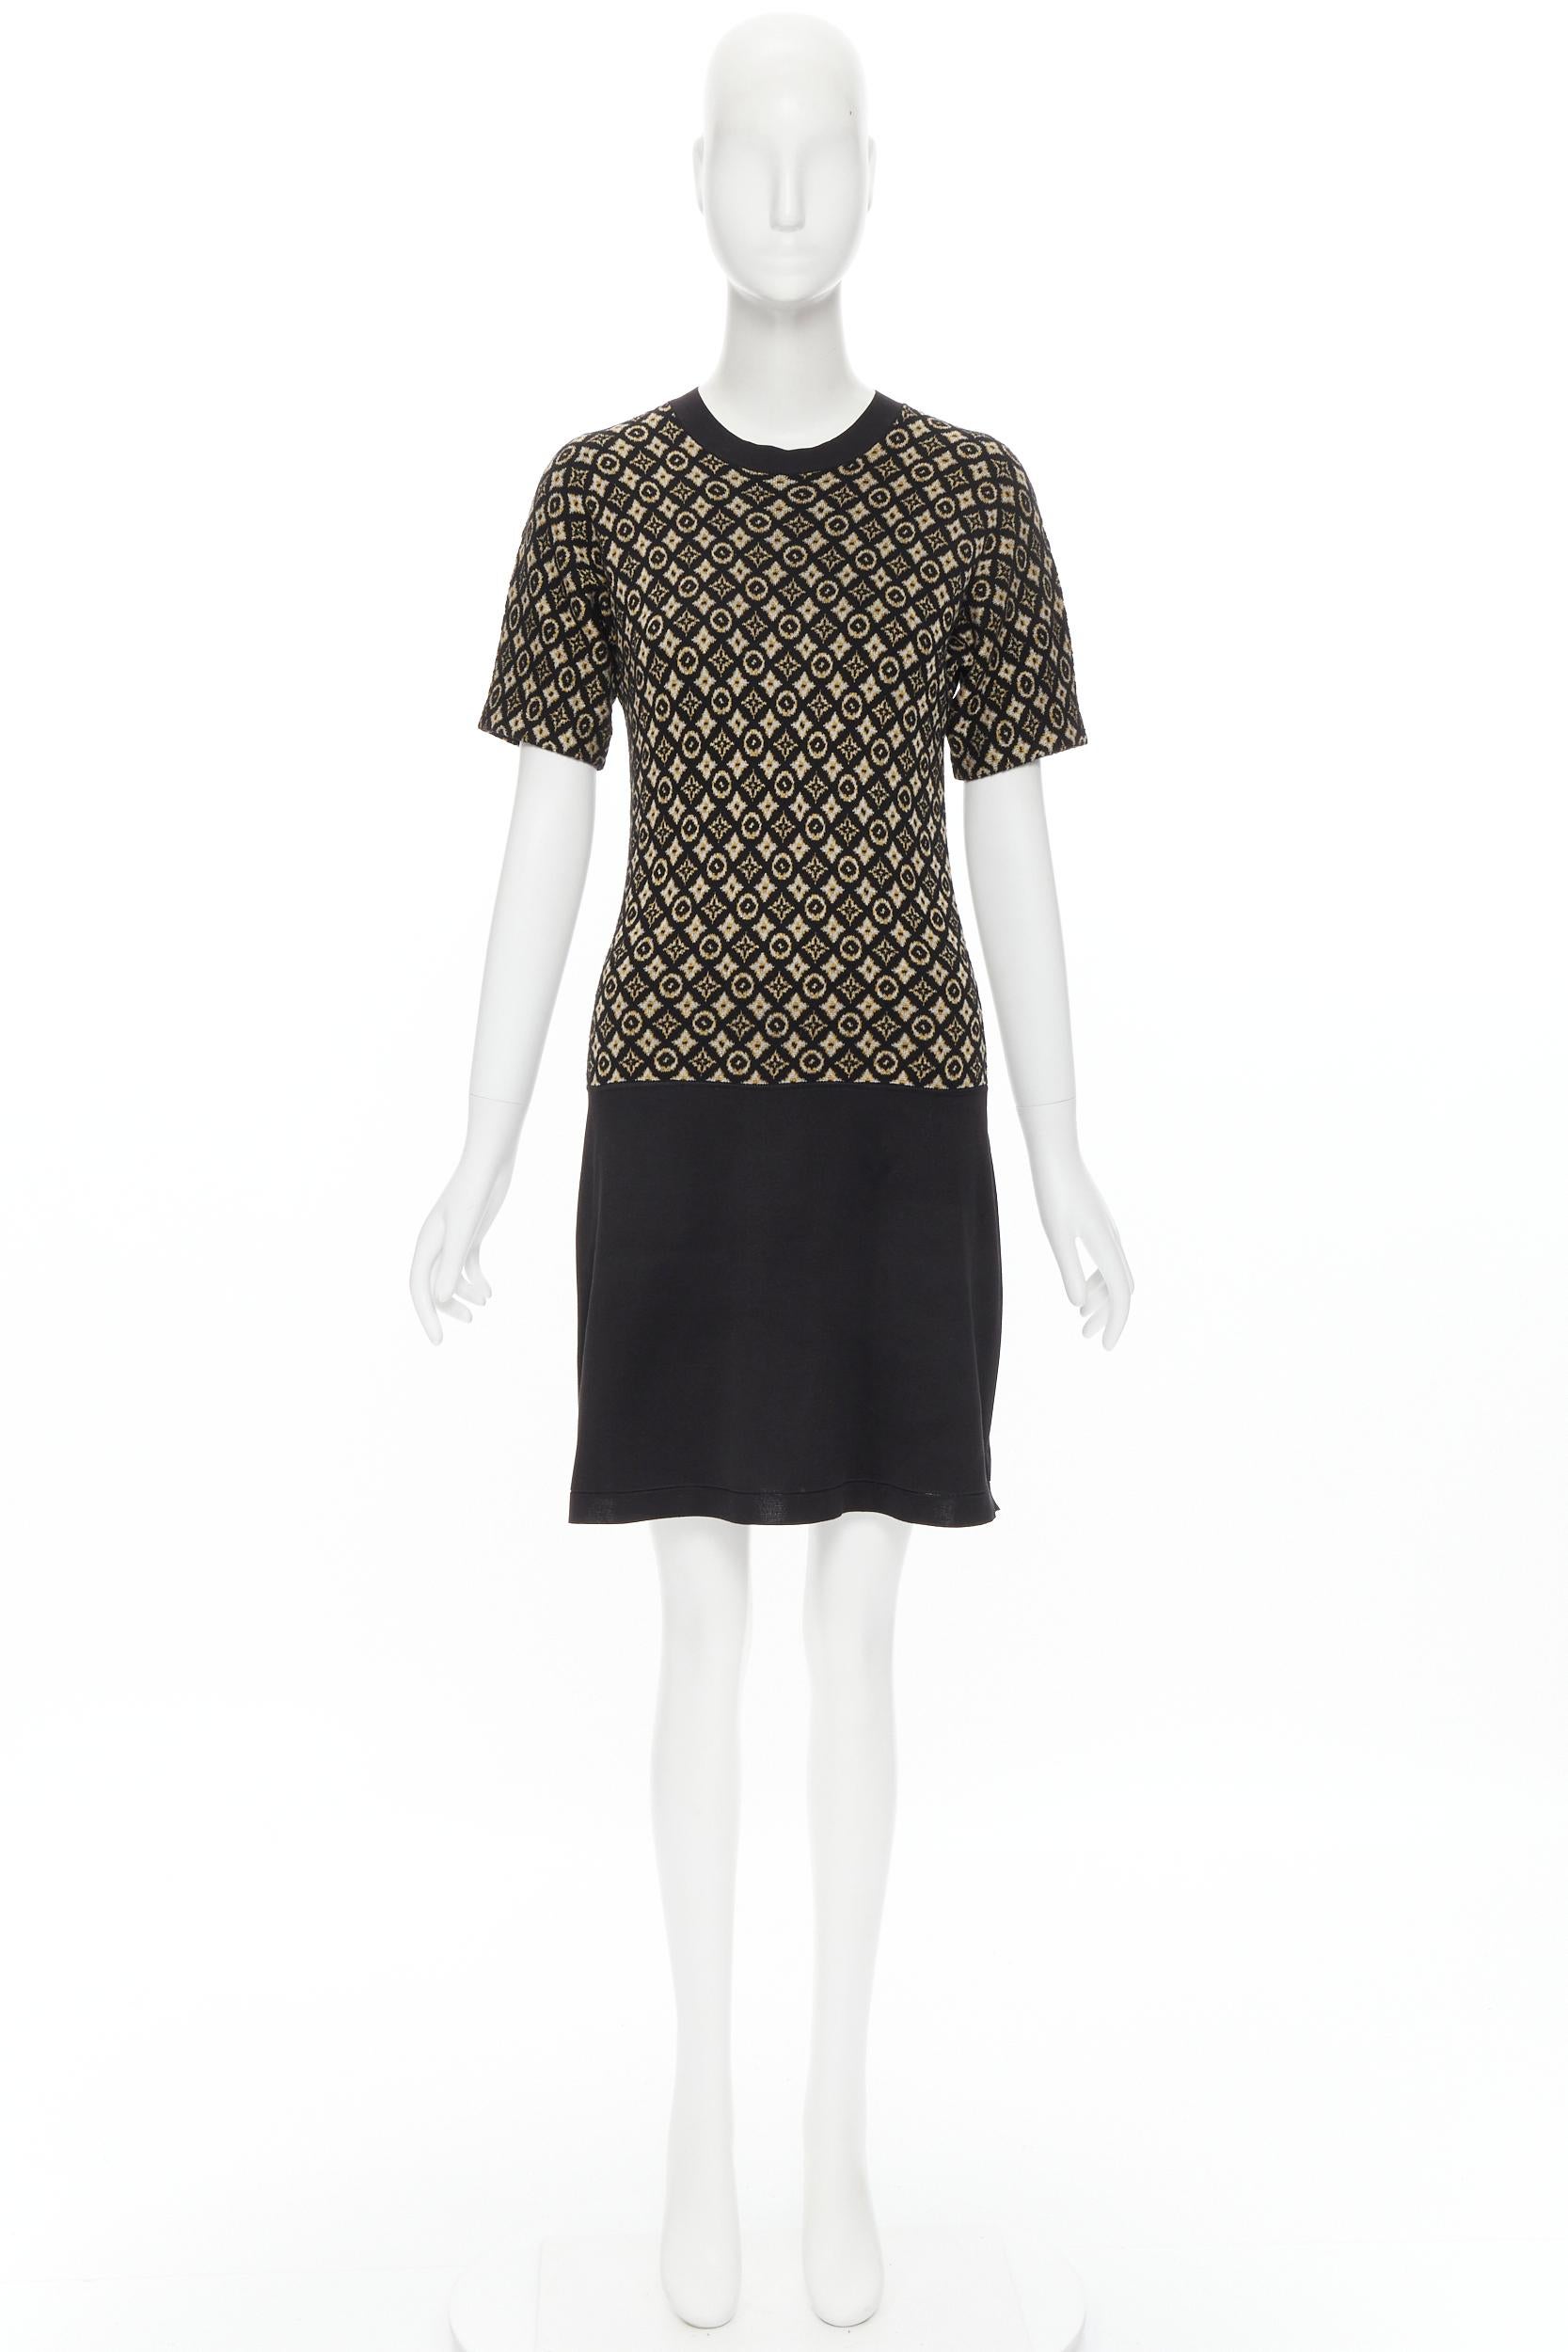 LOUIS VUITTON monogram silk cashmere knitted black stretch casual dress S 6